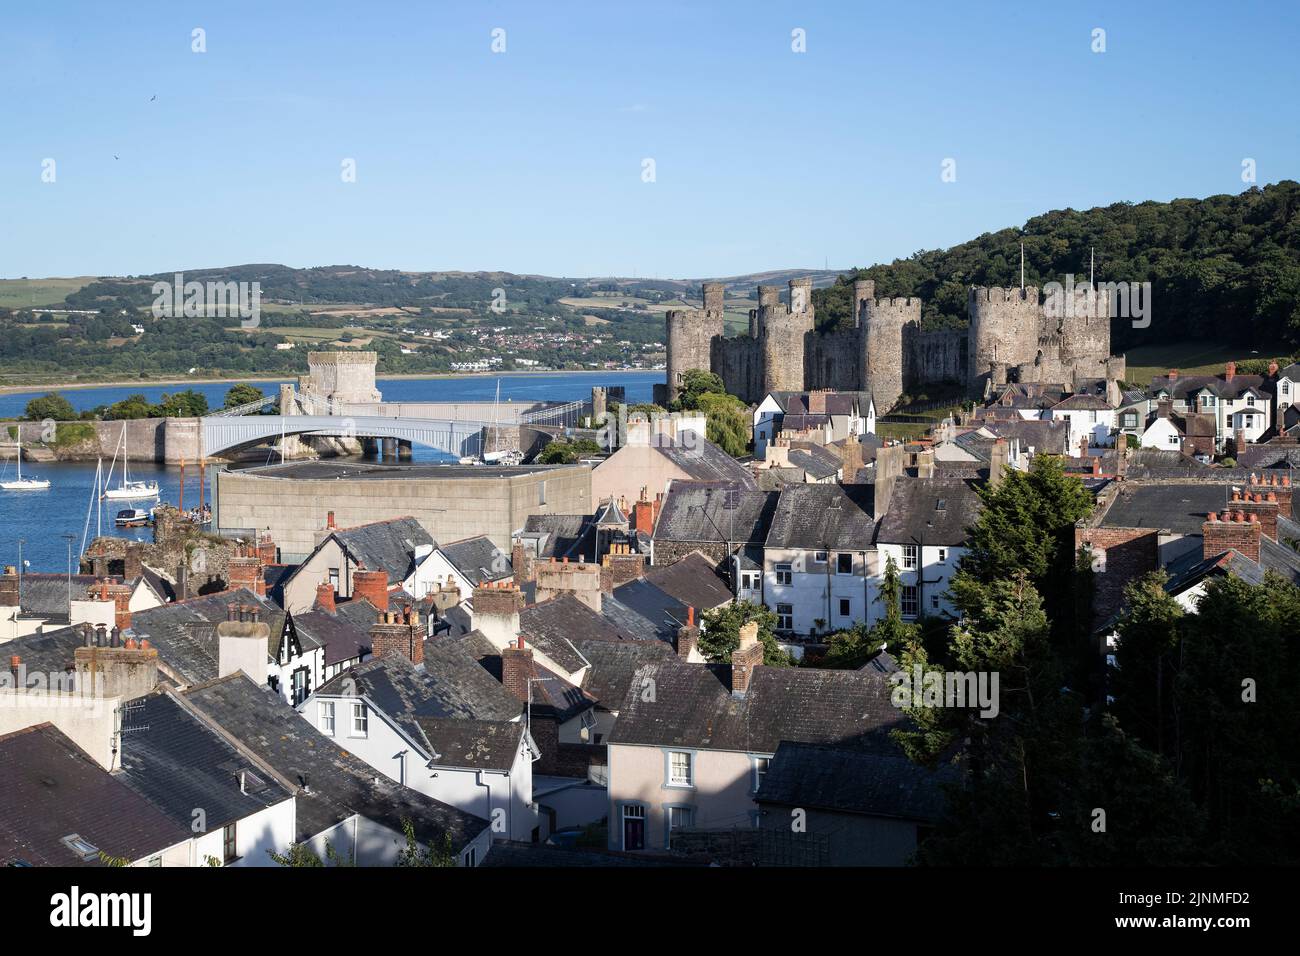 Conwy Castle and the walled town of Conwy (Aberconwy) Wales built in 1283 by Edward 1st and a Medieval fortress in an excellent state of preservation Stock Photo